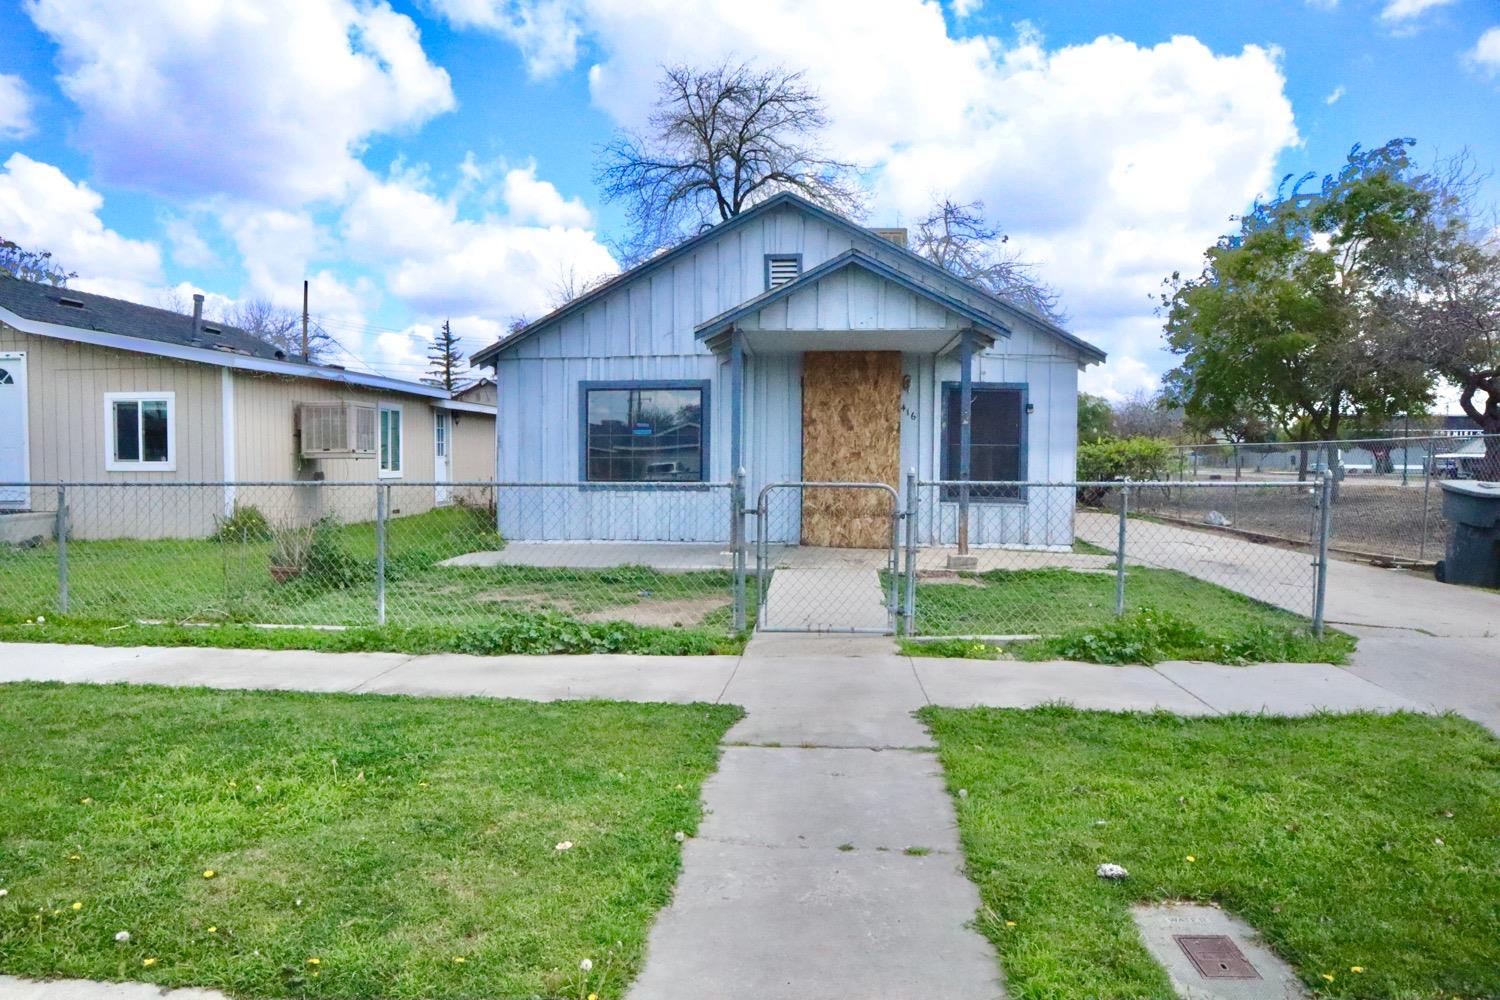 Photo of 416 N D St in Tulare, CA